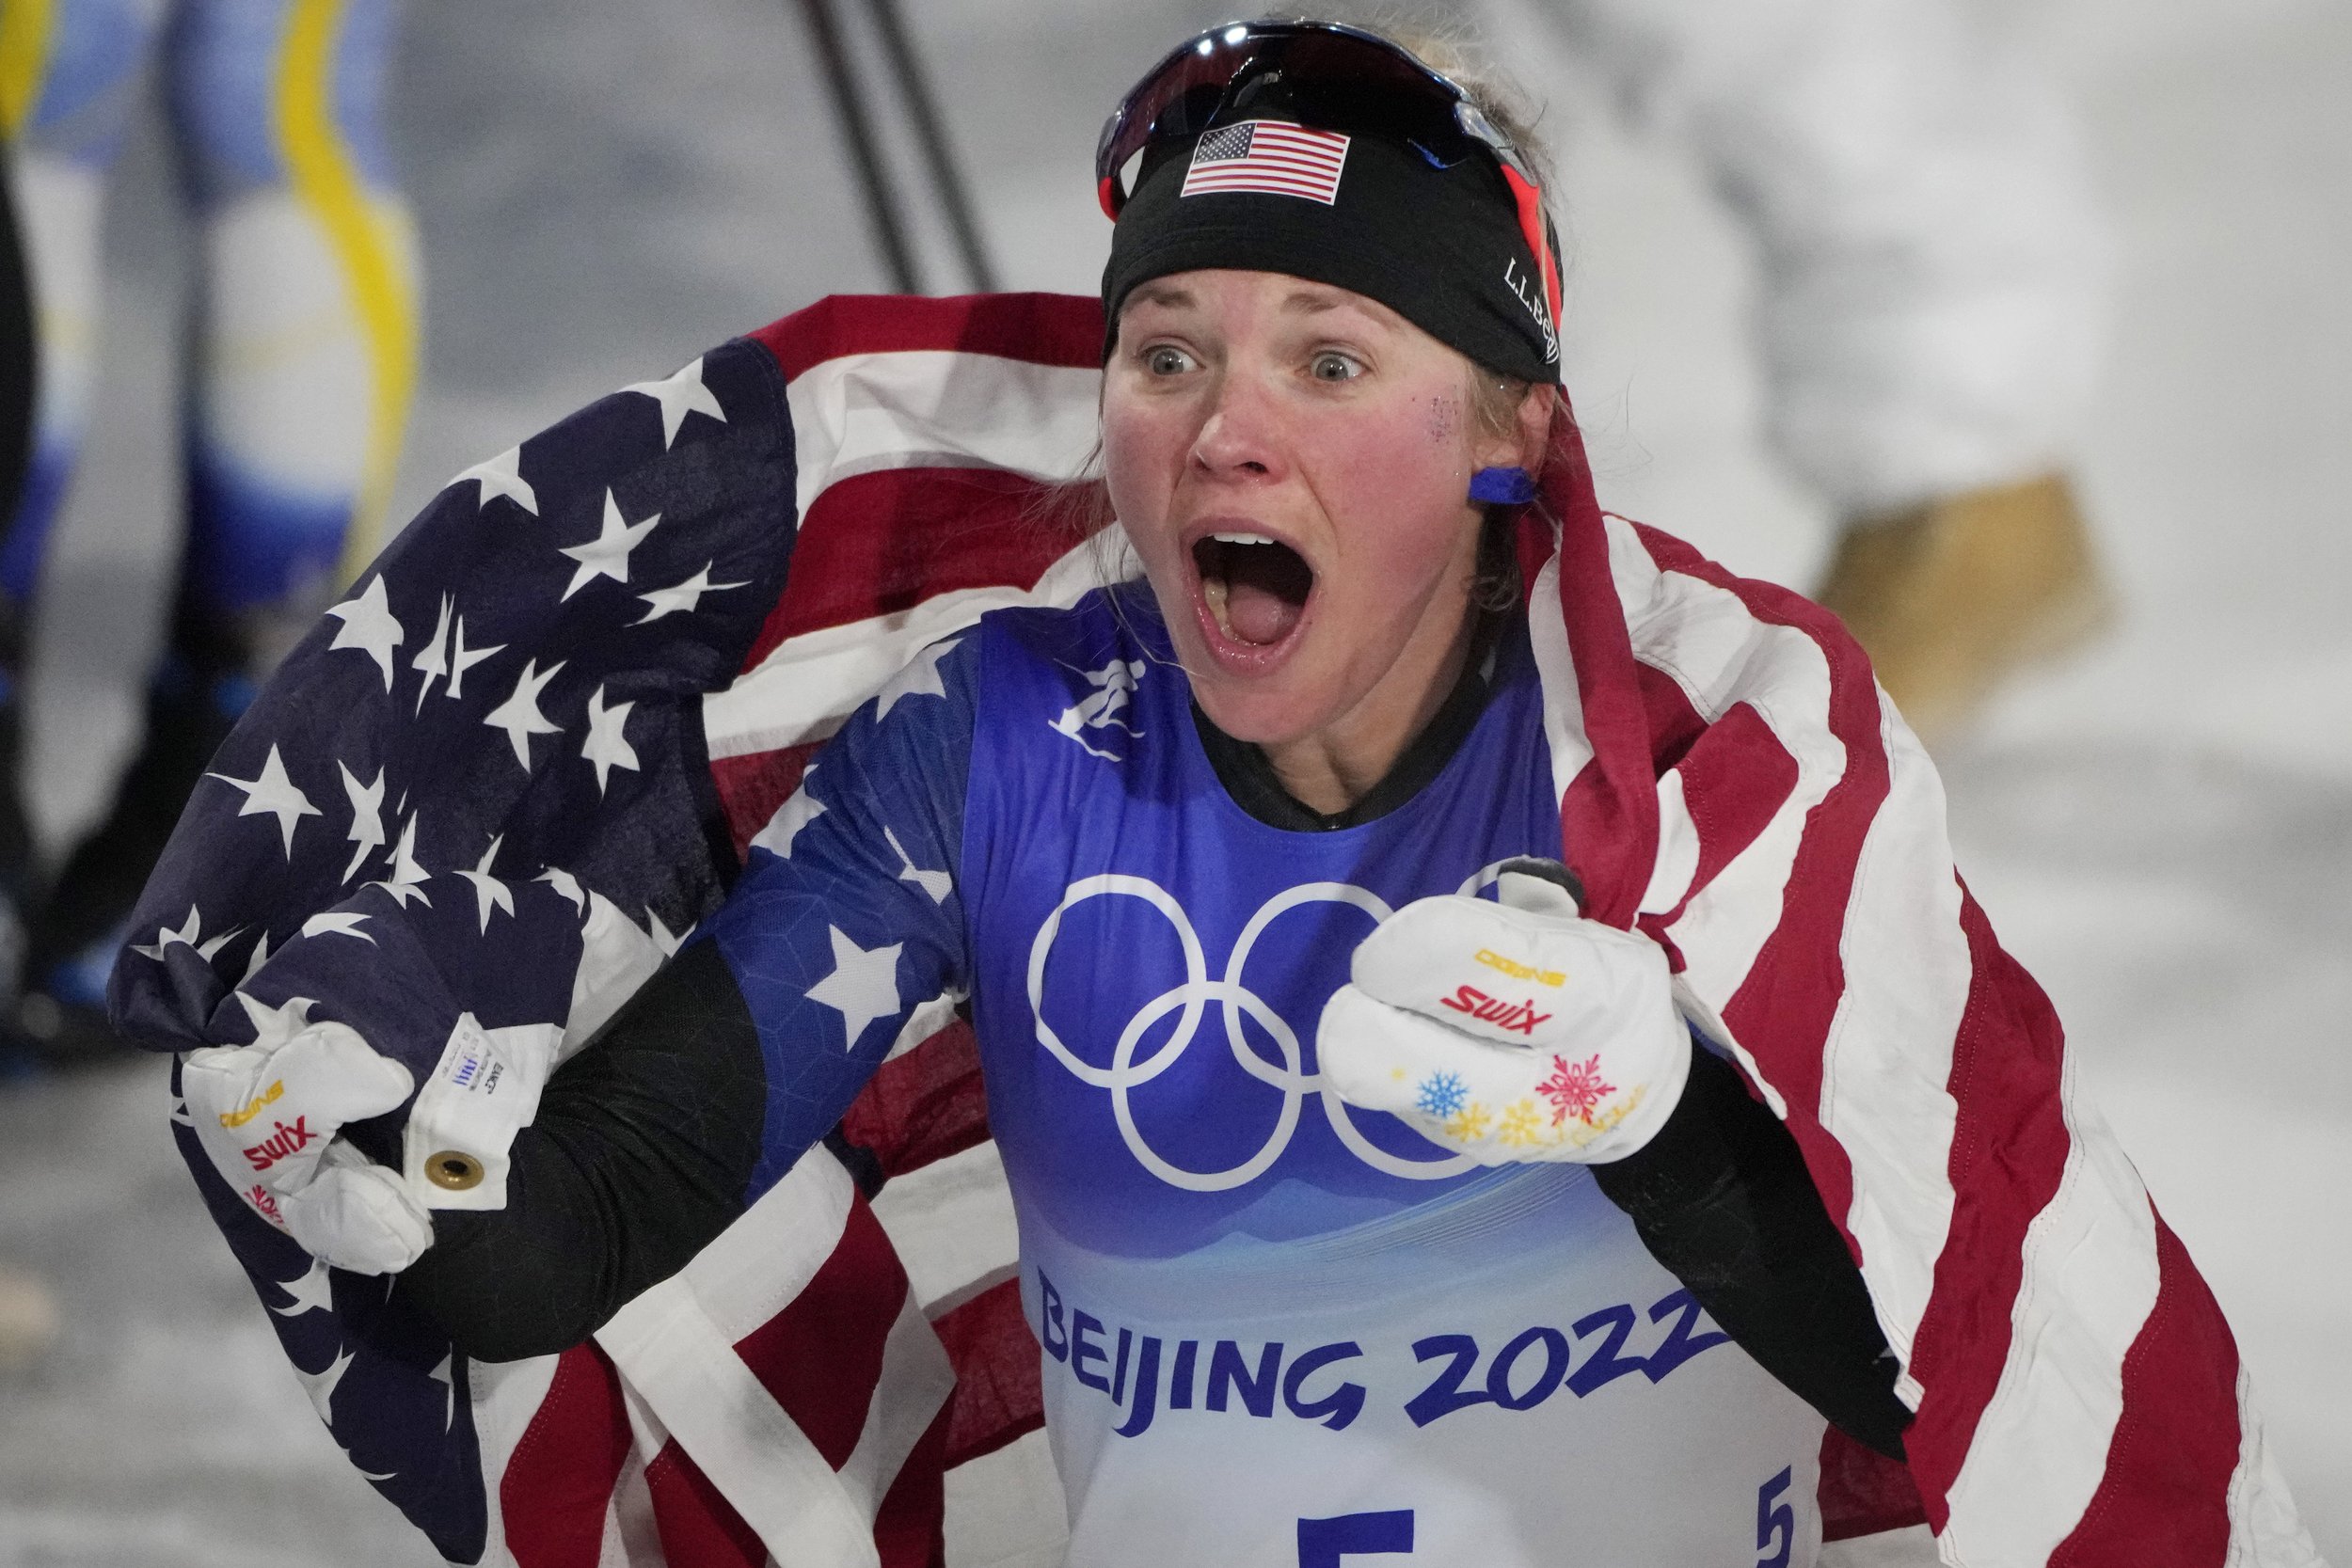  Jessie Diggins reacts after winning a bronze medal in the women's sprint free cross-country skiing competition at the 2022 Winter Olympics, Tuesday, Feb. 8, 2022, in Zhangjiakou, China. (AP Photo/Aaron Favila) 